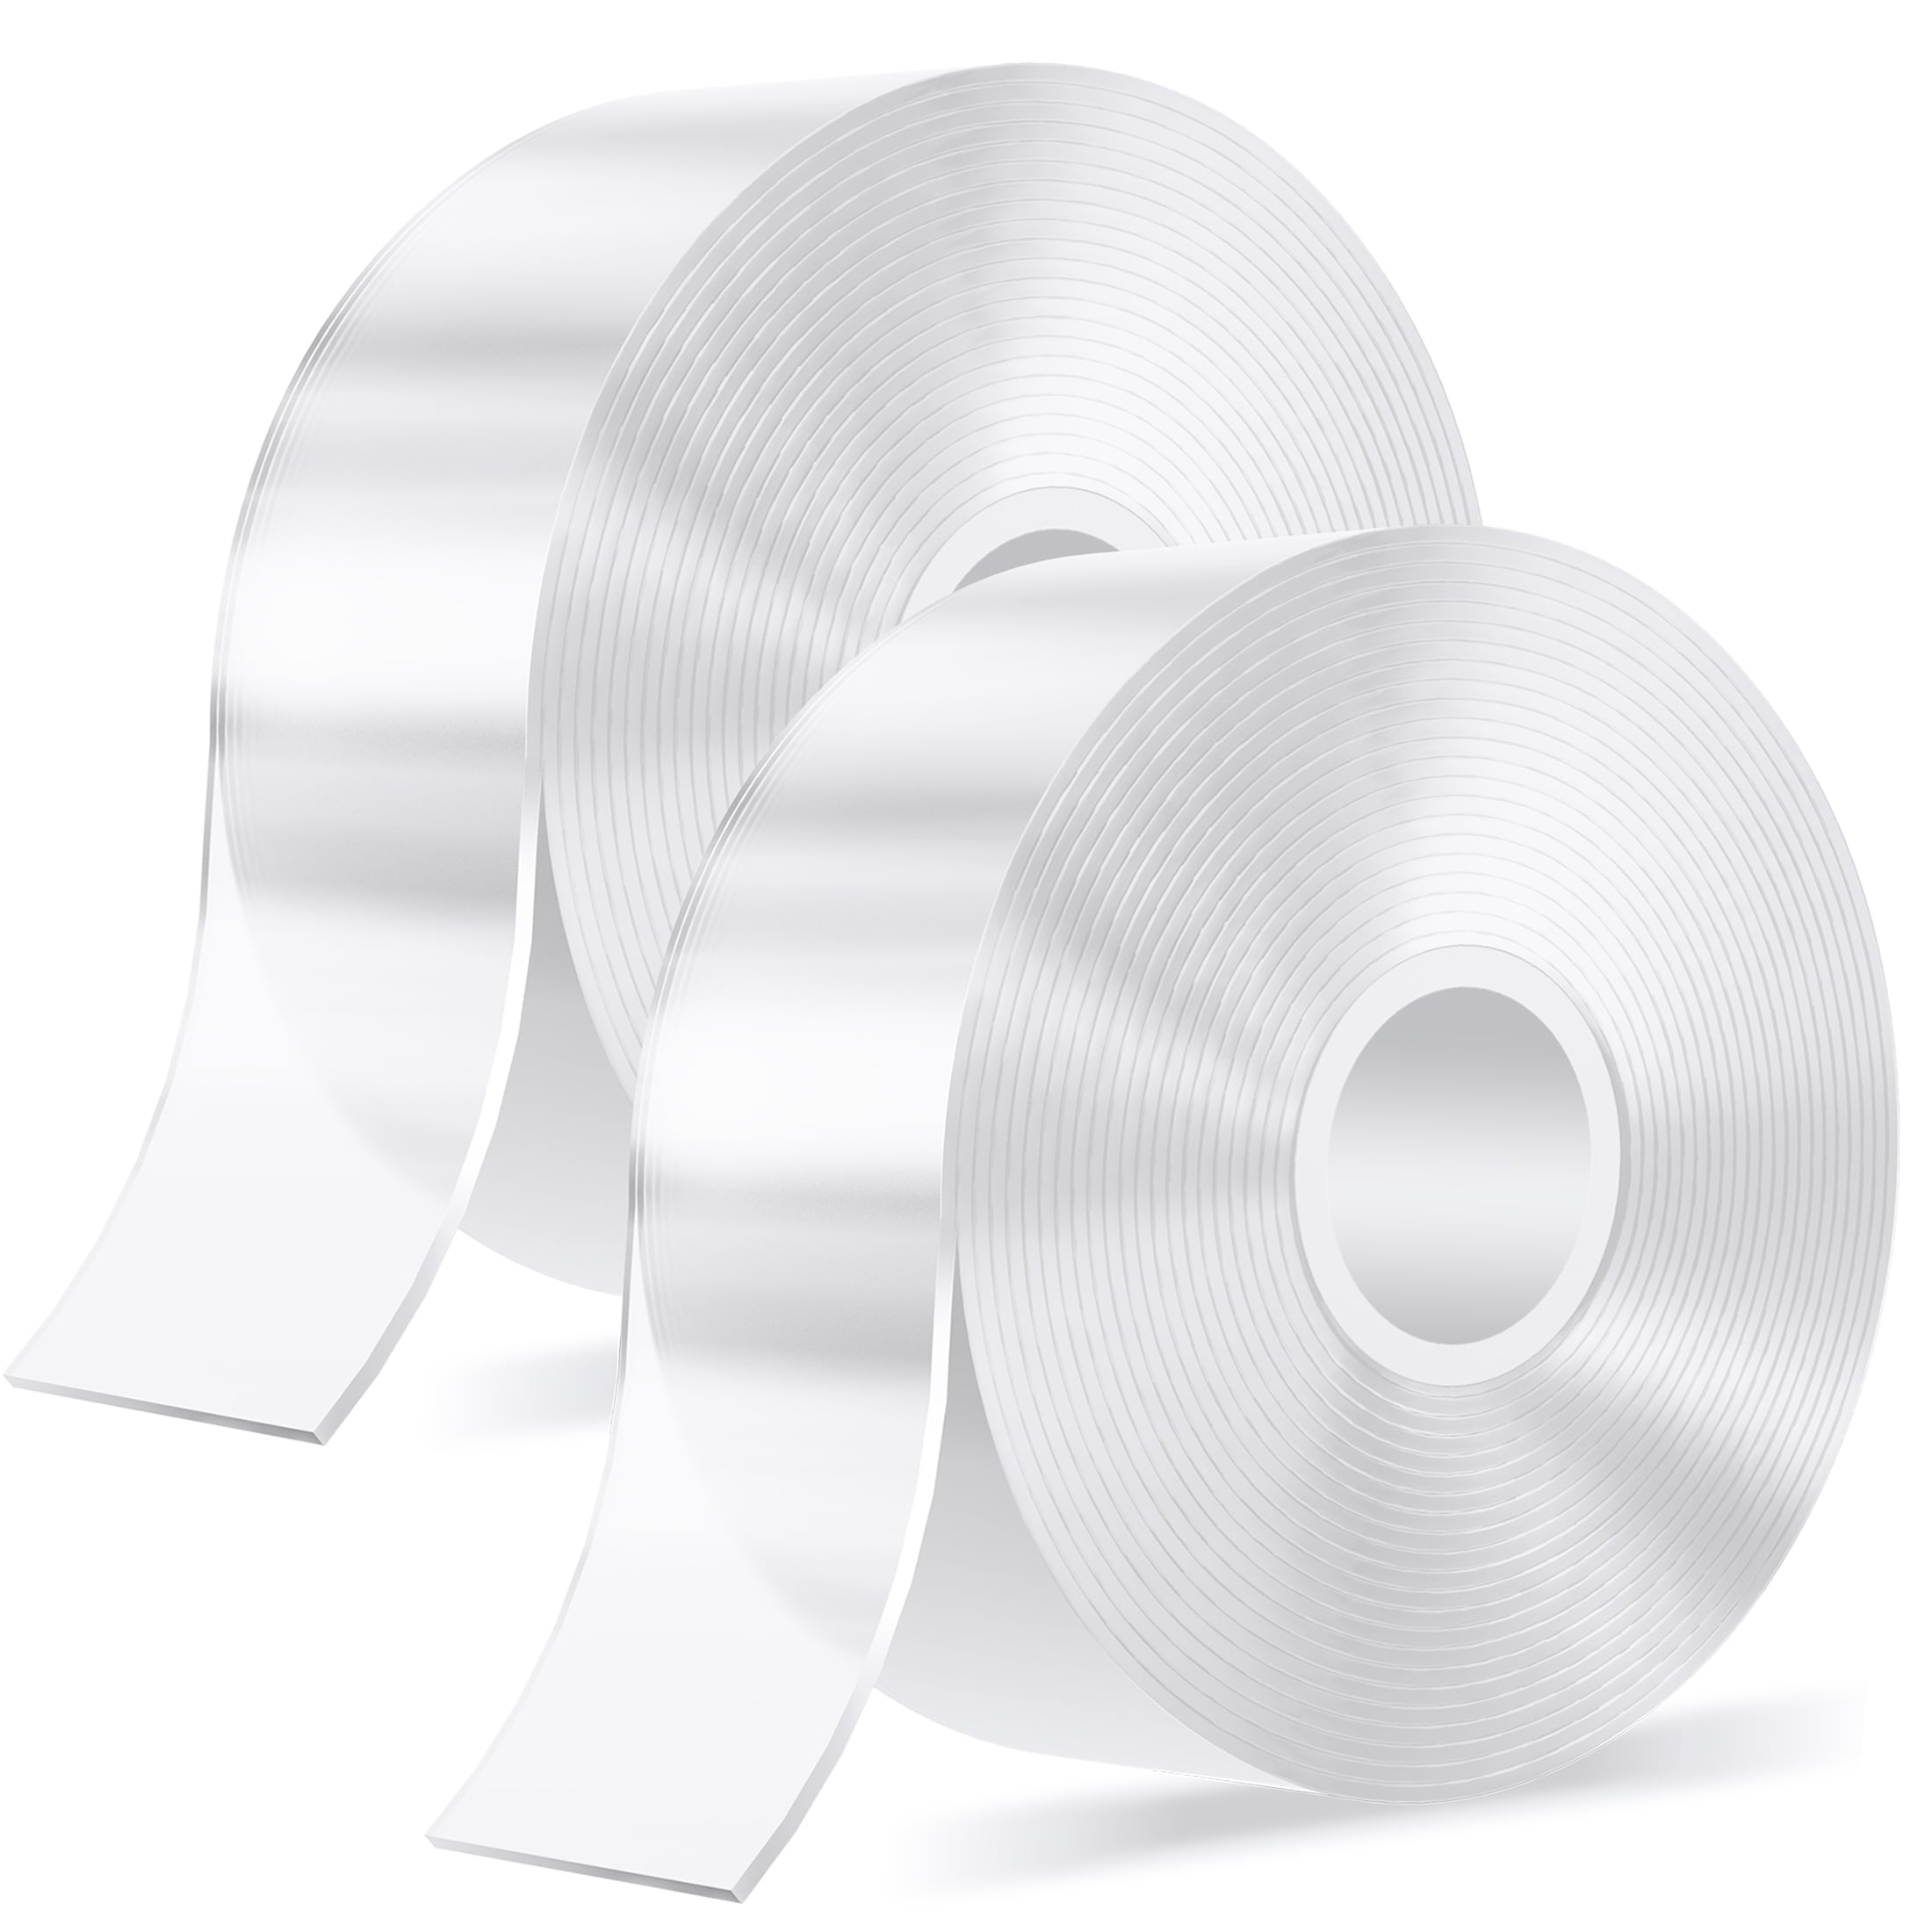 Toyfunny Strong Double Sided Tape Heavy Duty Double Sided Installation Tape Removable Double Sided Tape for Wall Hanging Clear Double Sided Tape